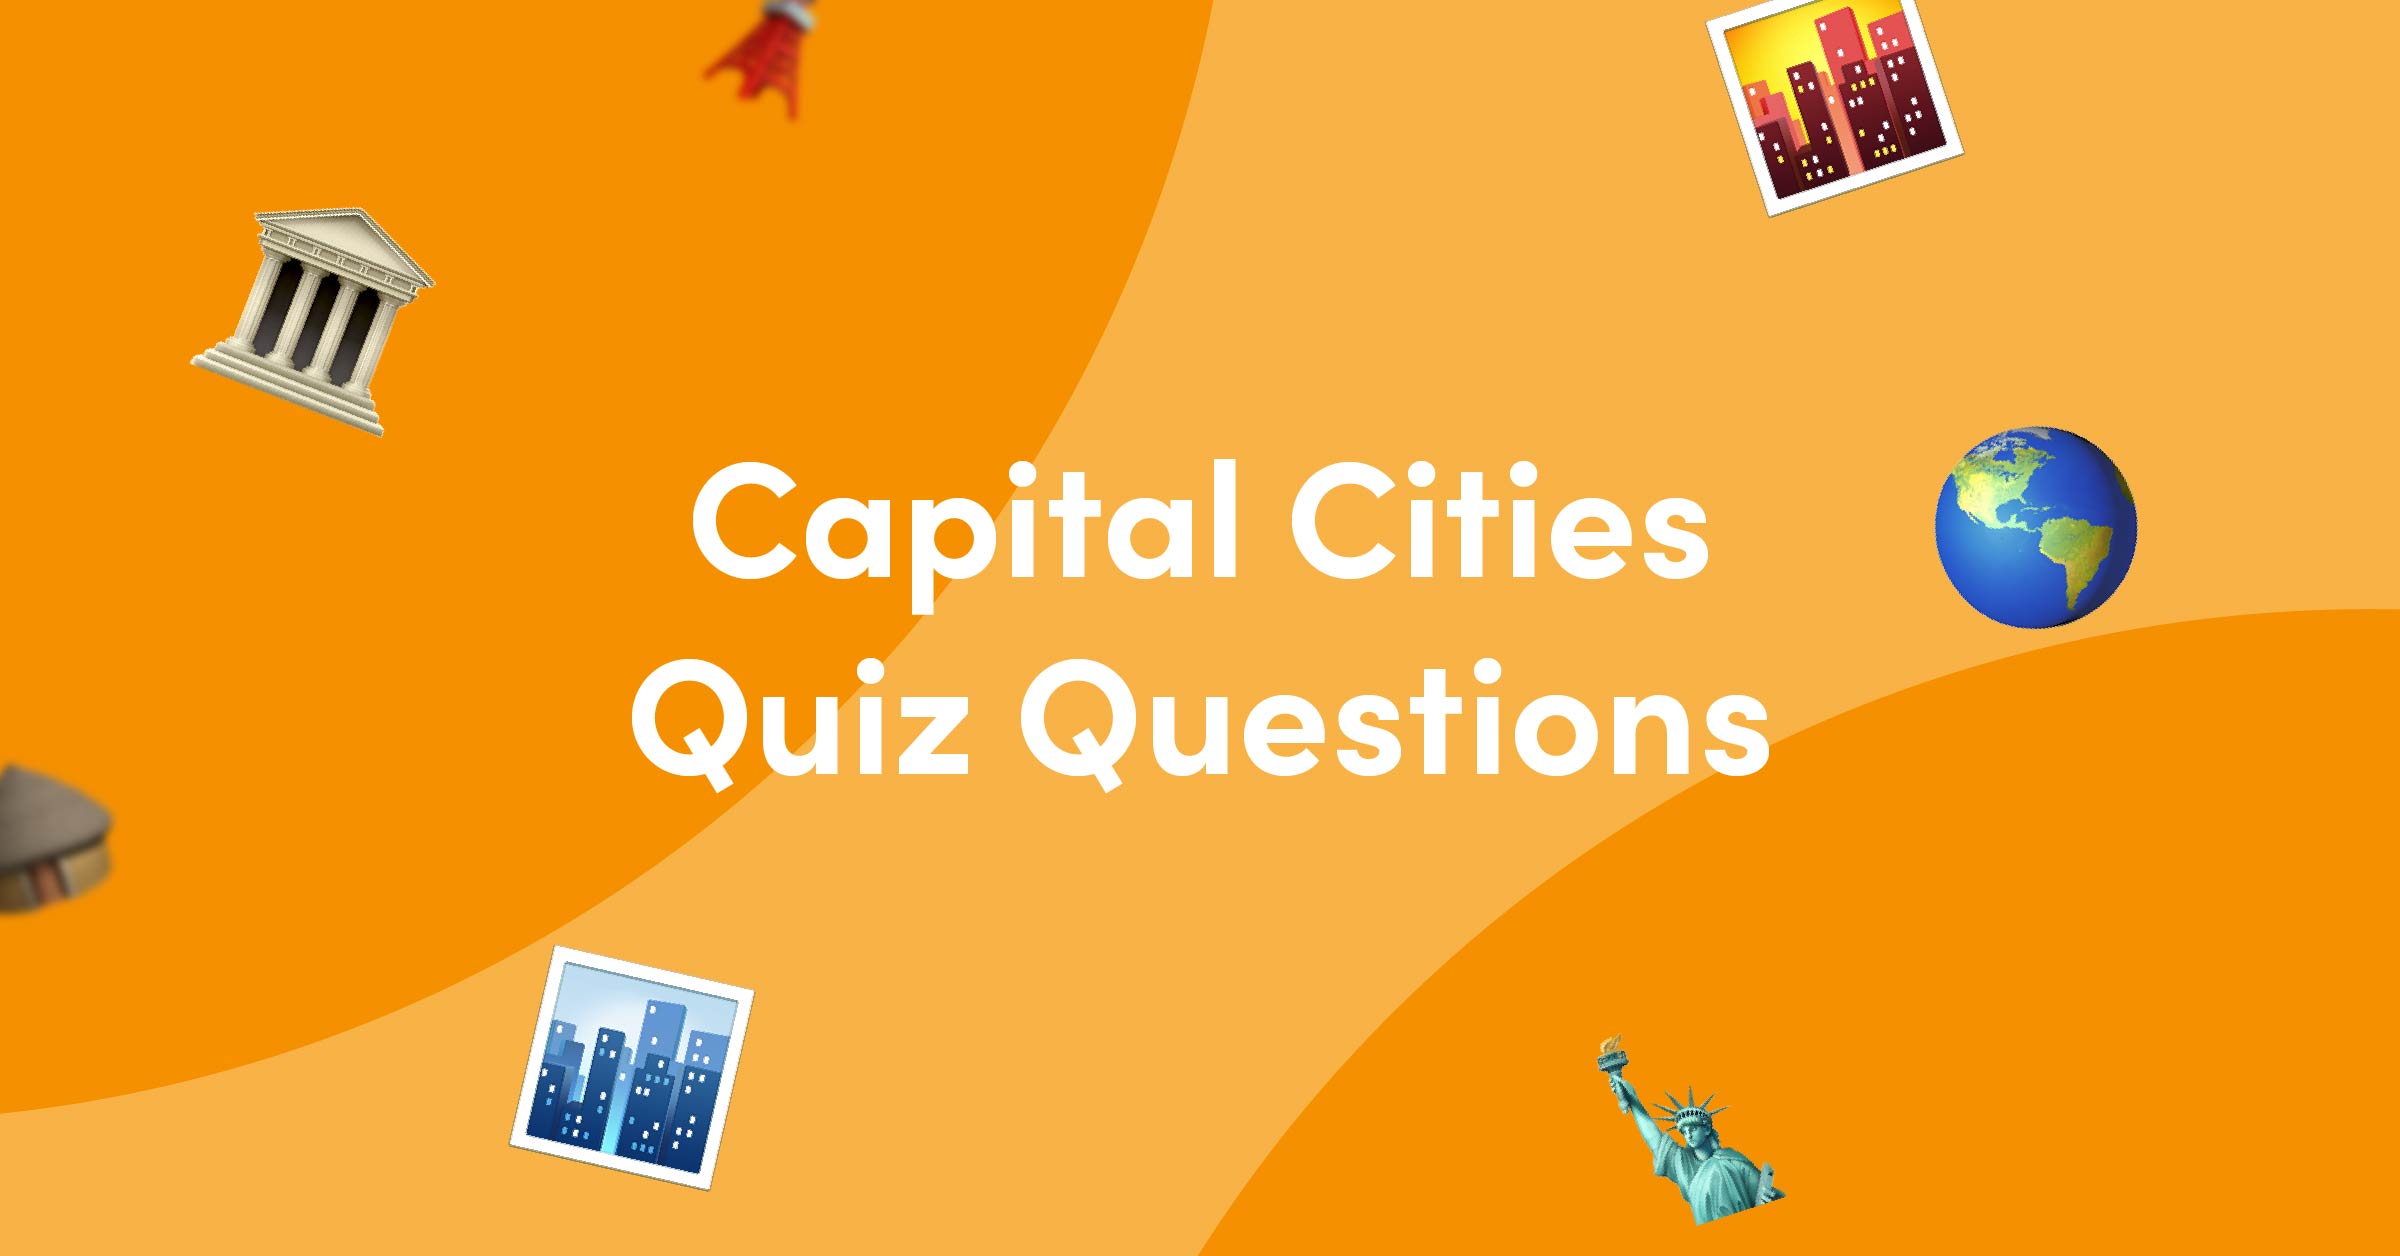 Emojis on orange background for capital cities quiz questions and answers